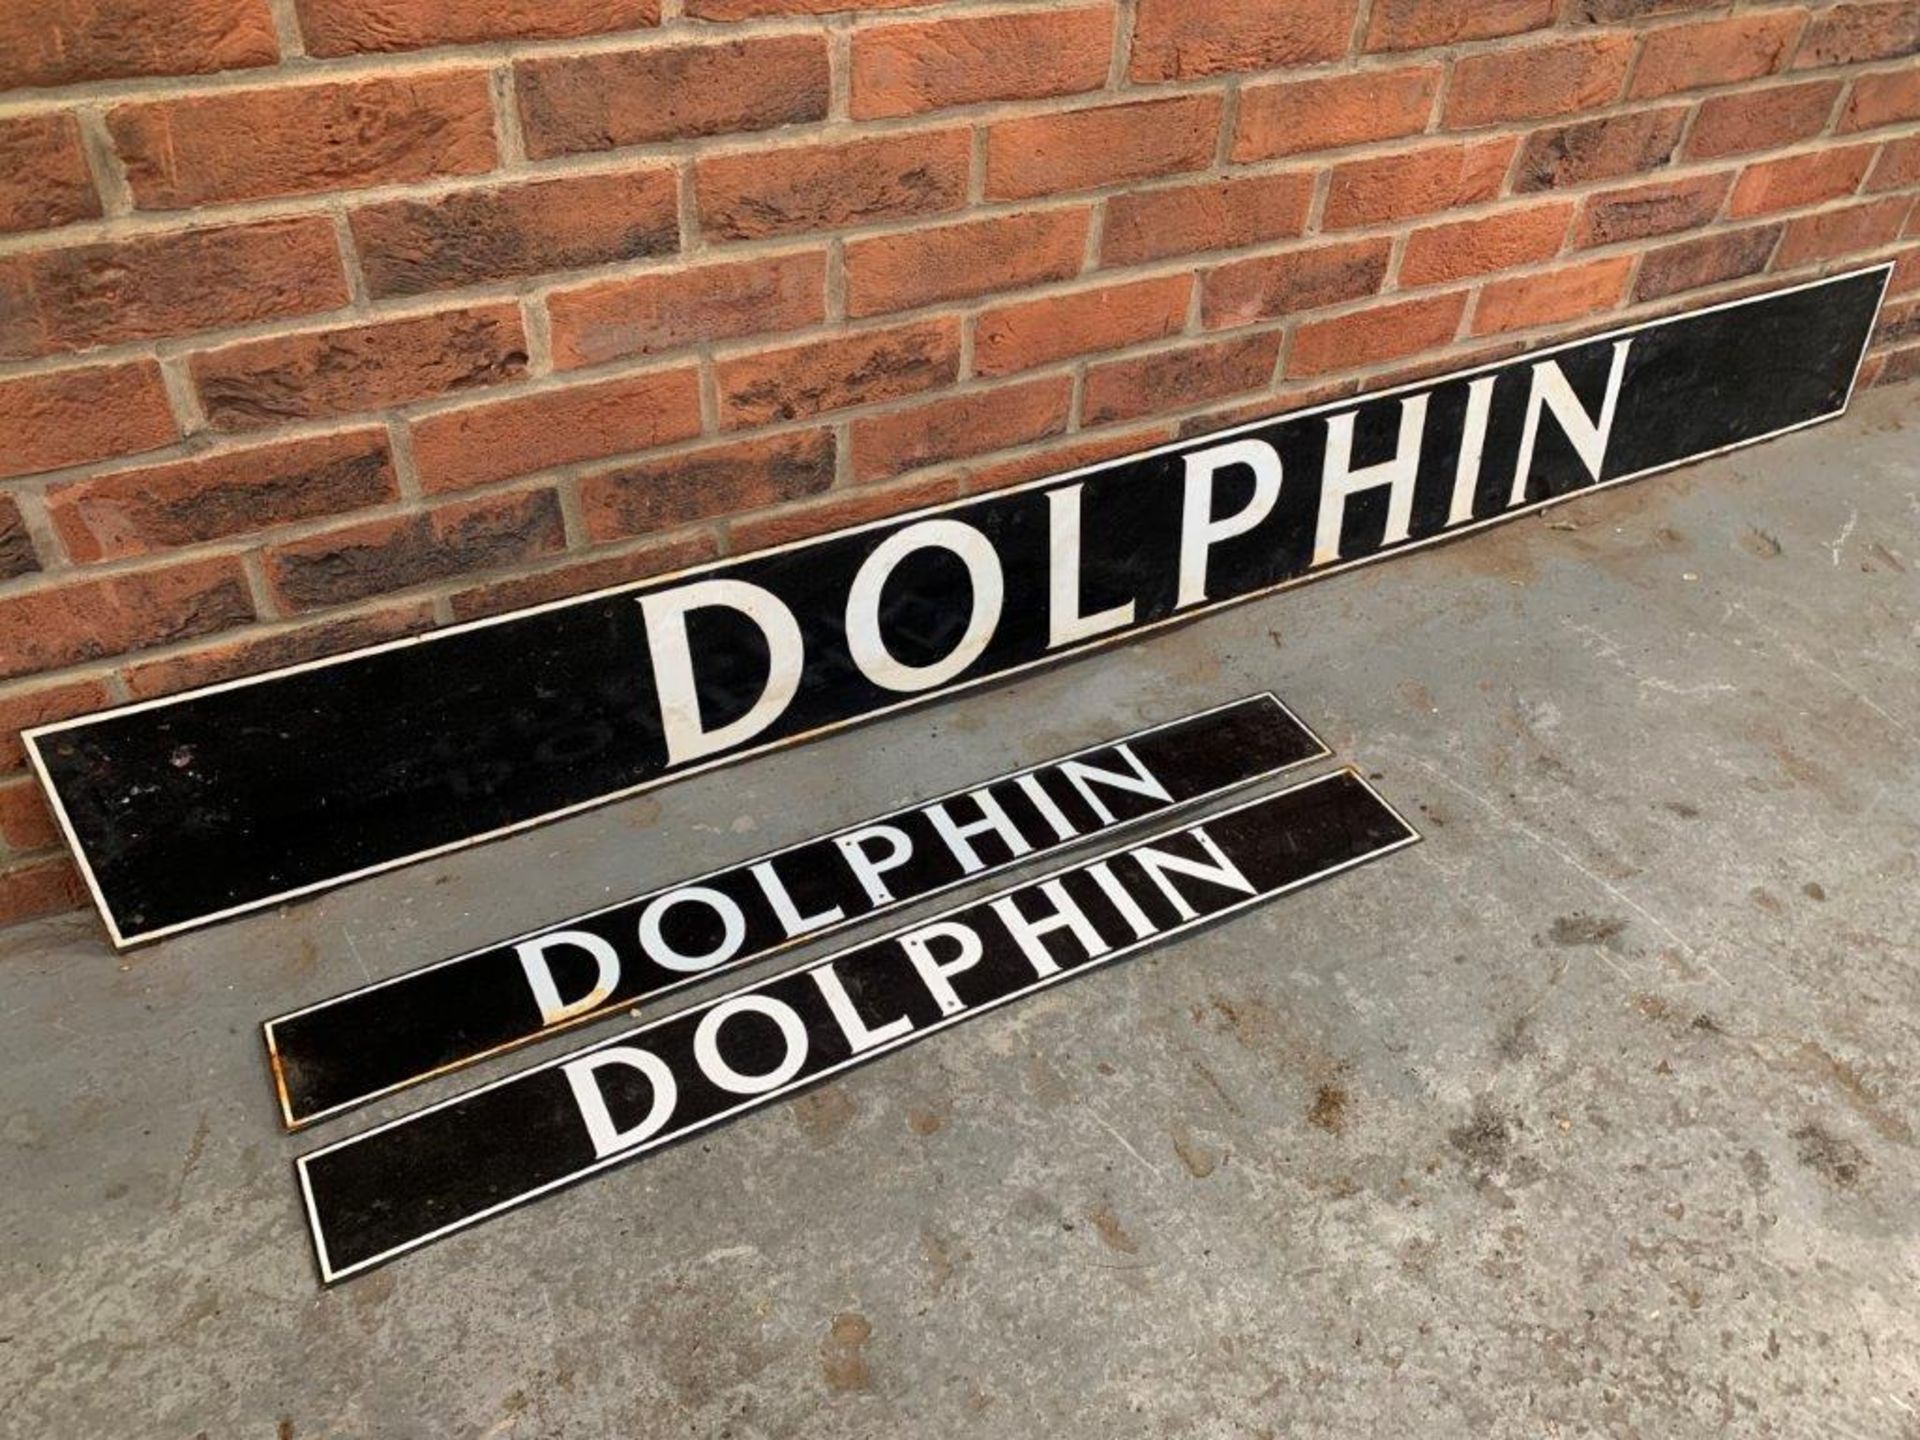 Three Dolphin Enamel Signs - Image 2 of 2